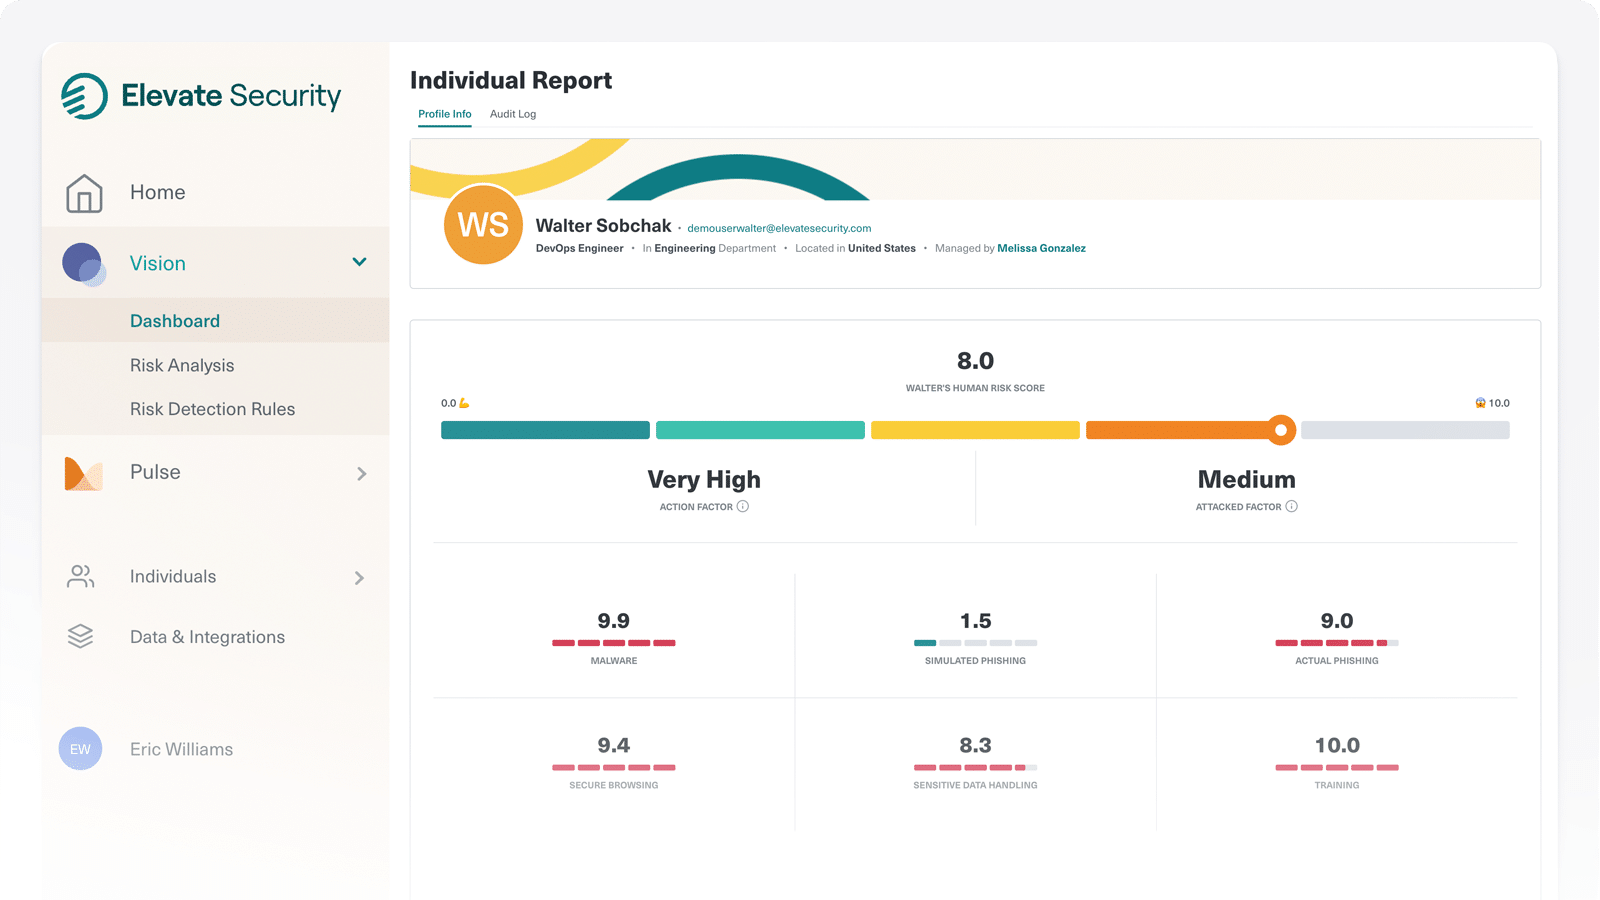 Image of the Elevate Security Dashboard individual report